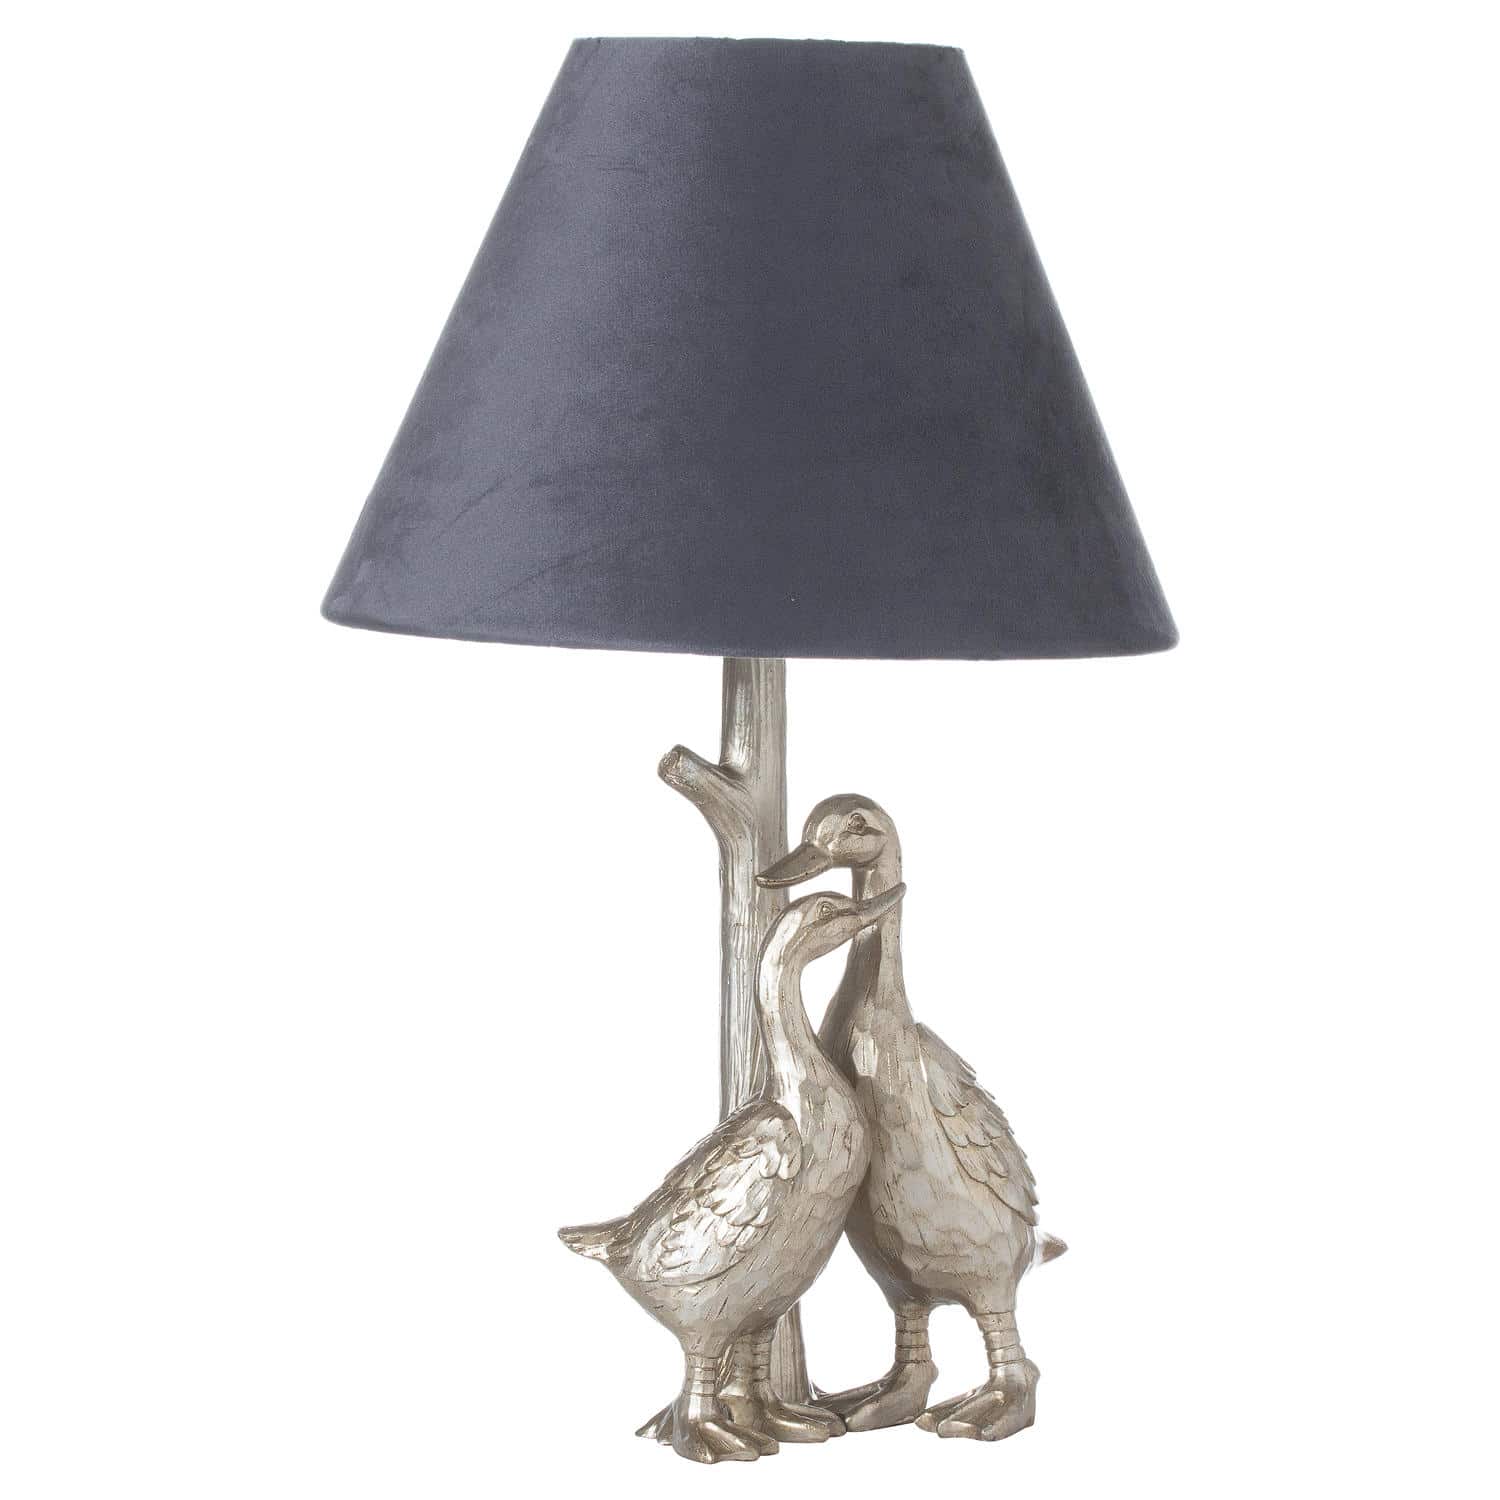 Silver Pair Of Ducks Table Lamps With Velvet Shade